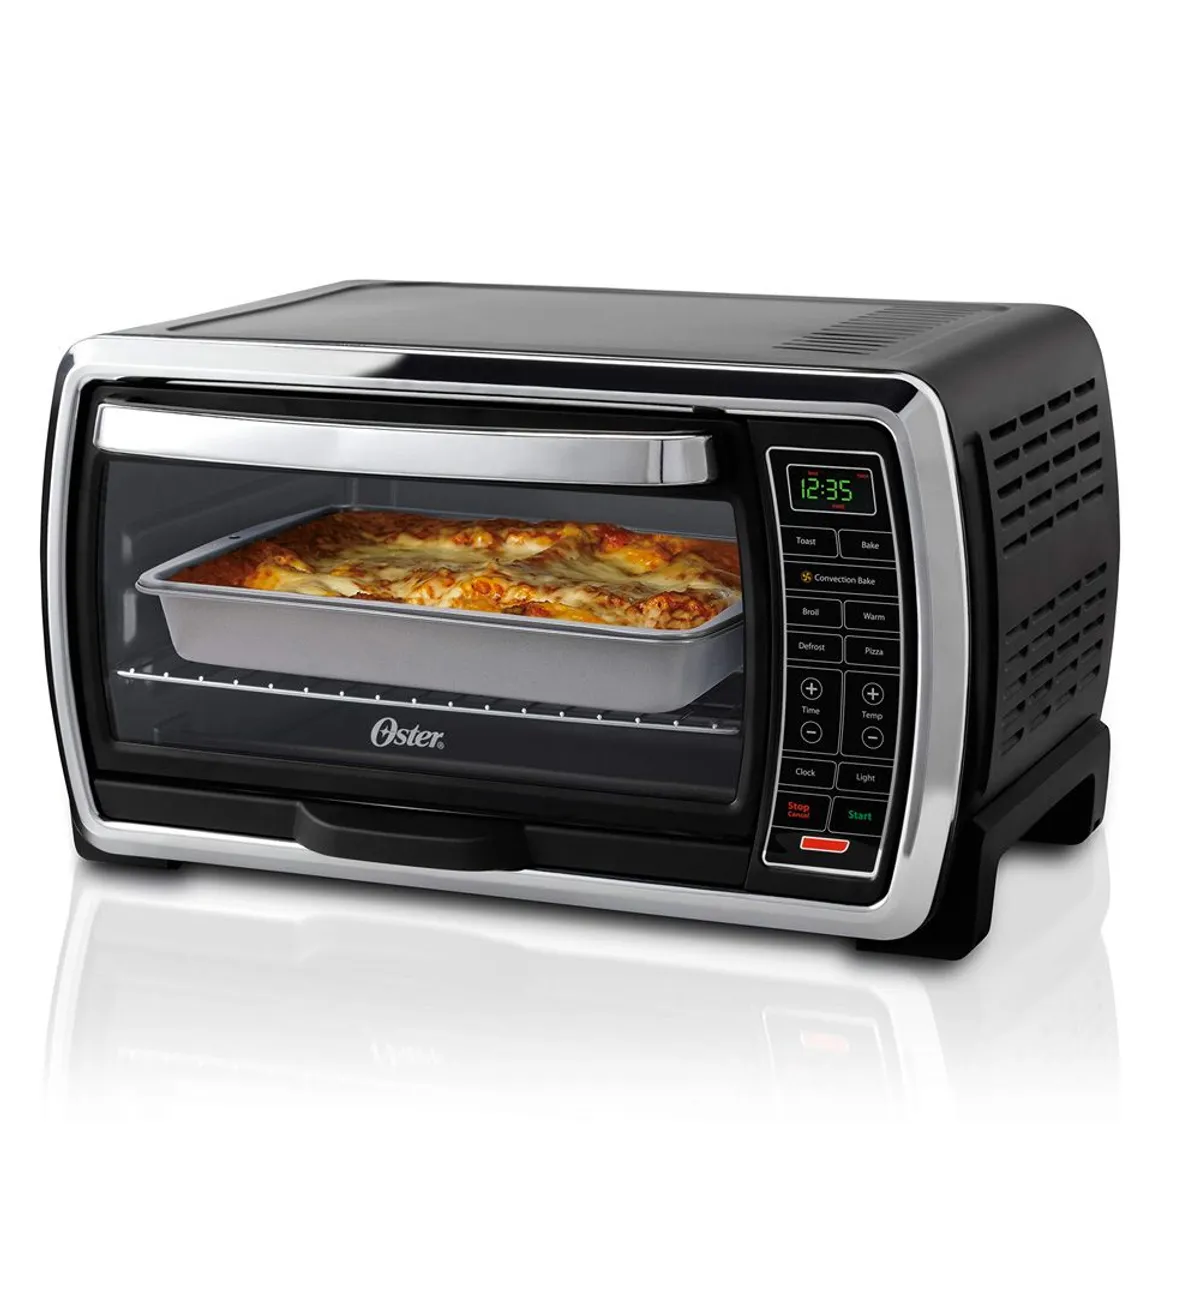 Oster Digital Countertop Convection Toaster Oven review